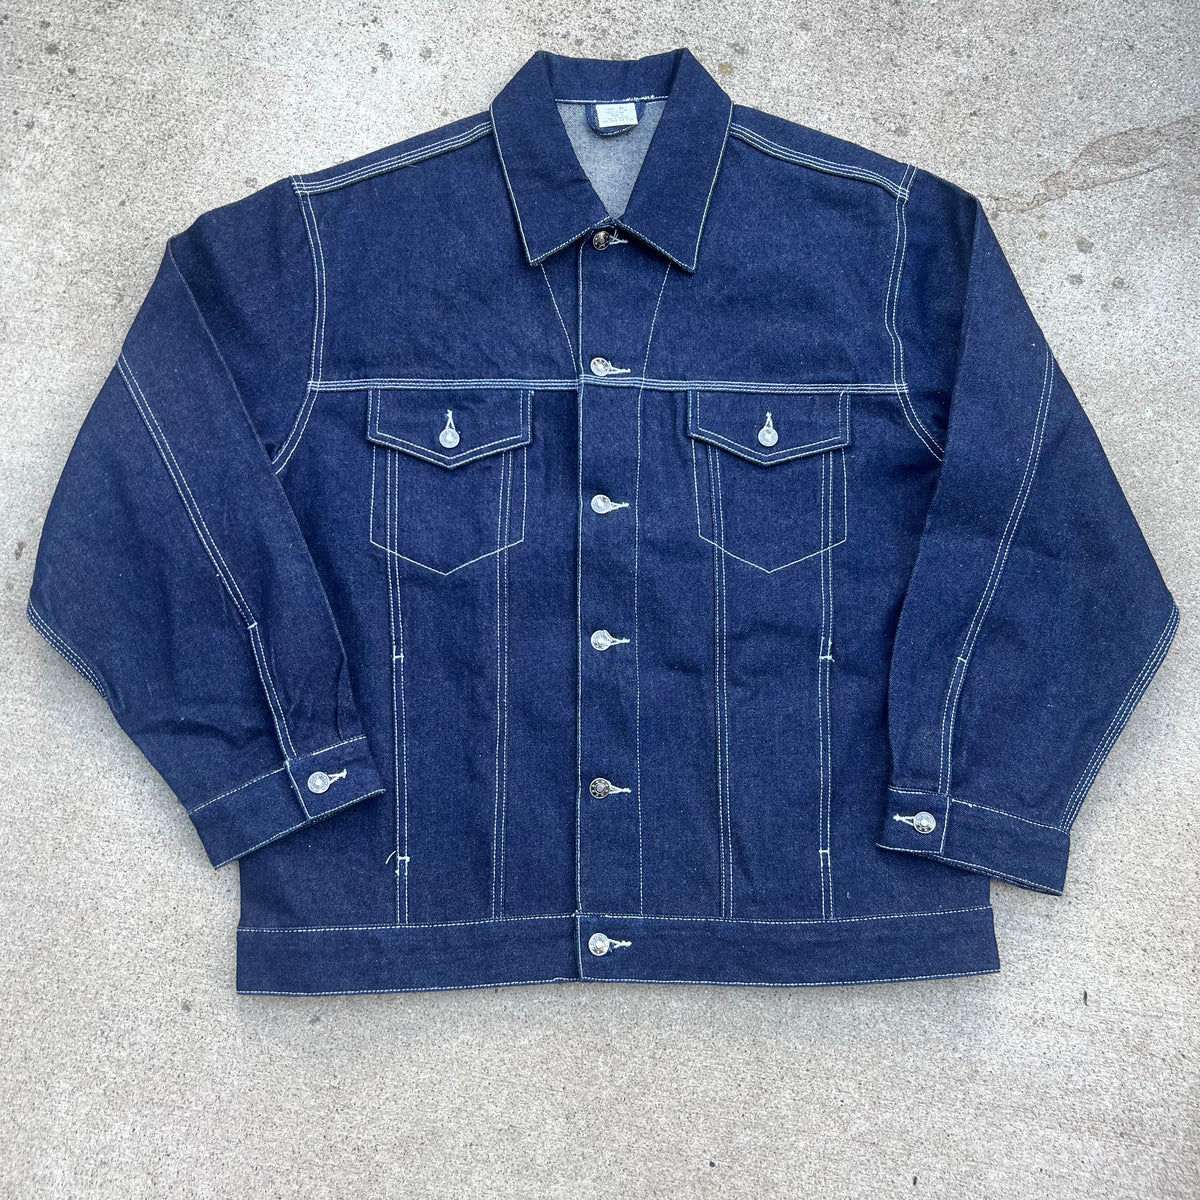 Aged Threads | 90's denim jacket fits like an XL | Carrot Shopping